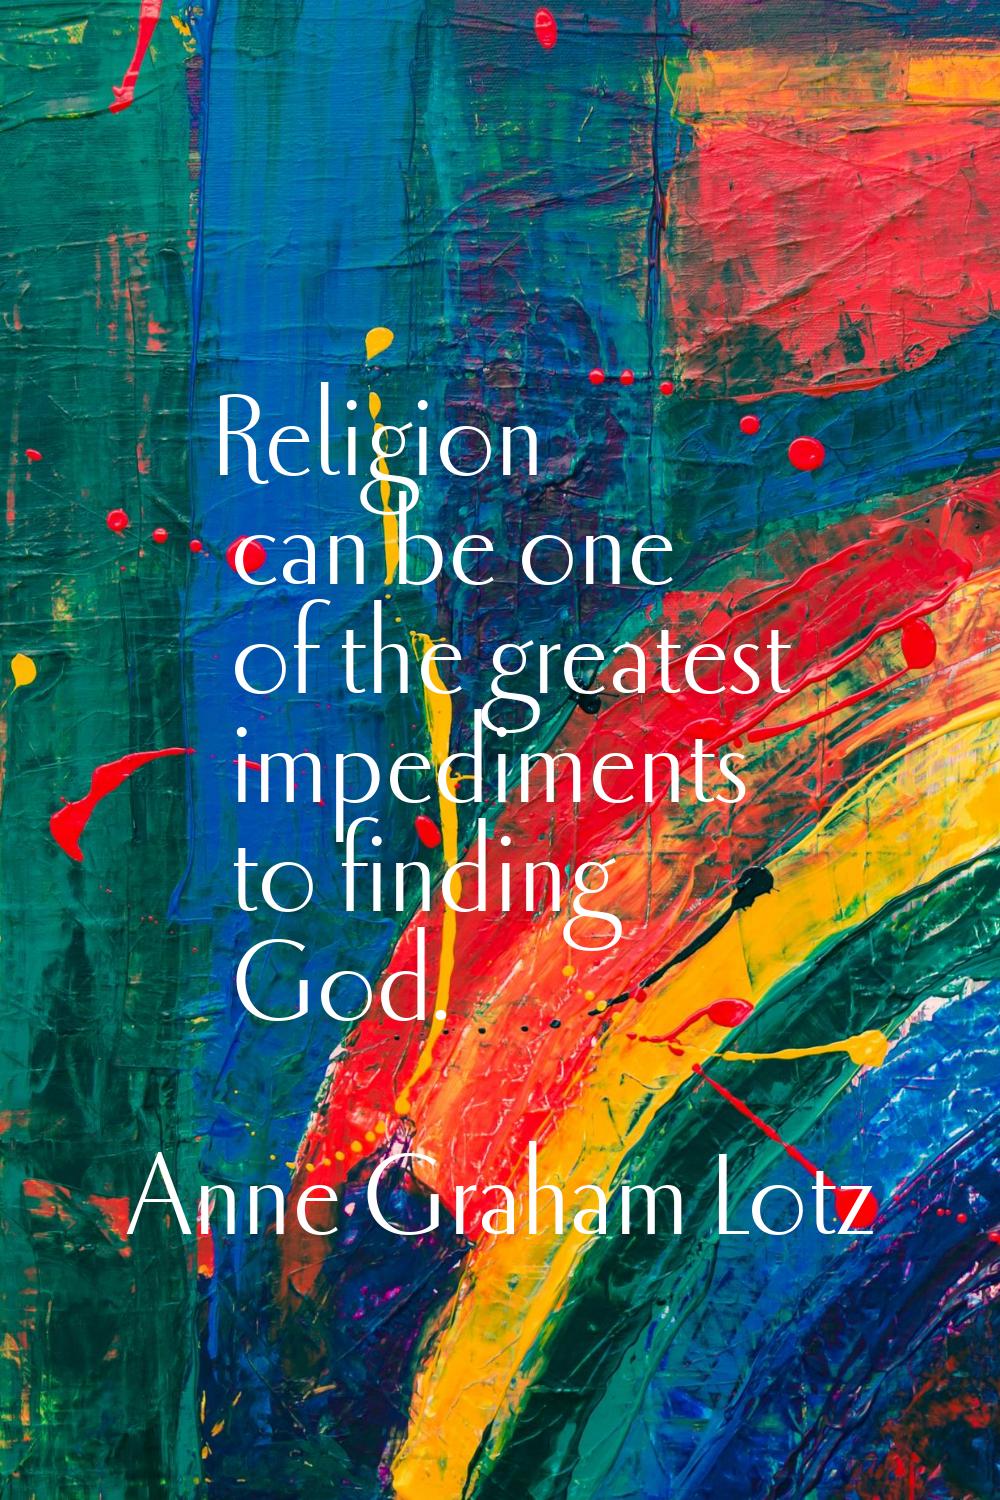 Religion can be one of the greatest impediments to finding God.